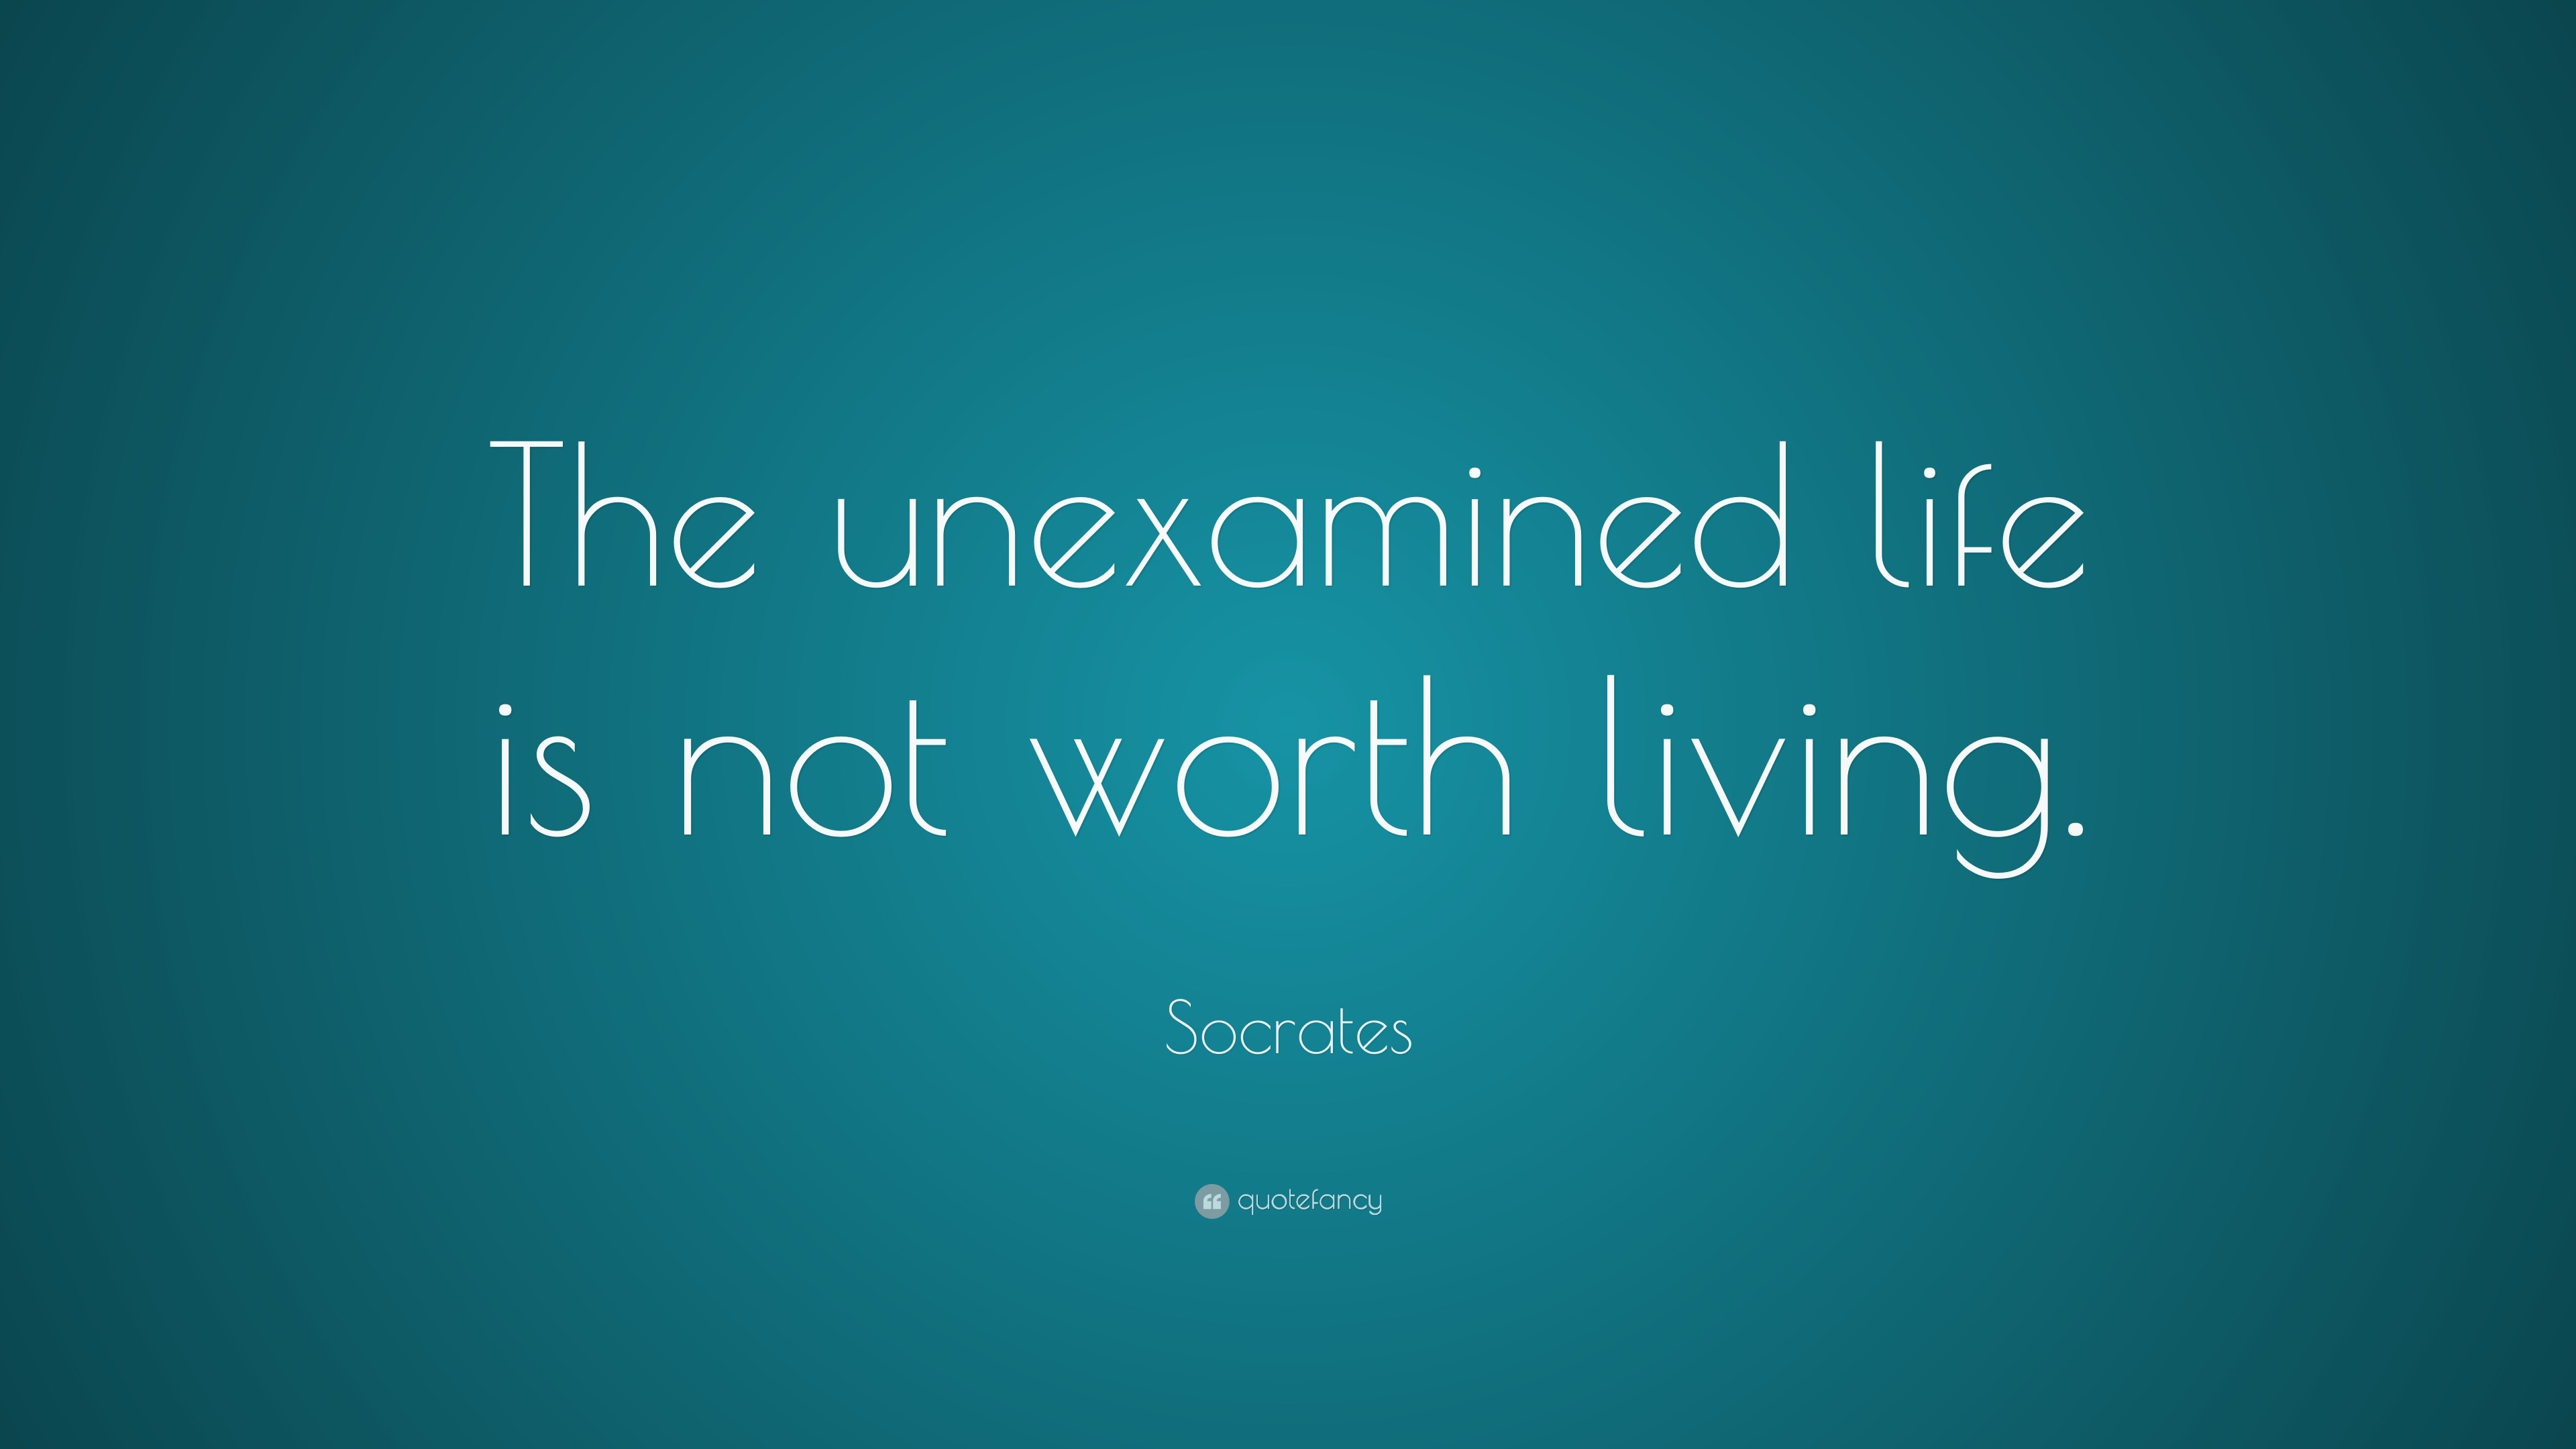 Socrates Quote: "The unexamined life is not worth living ...